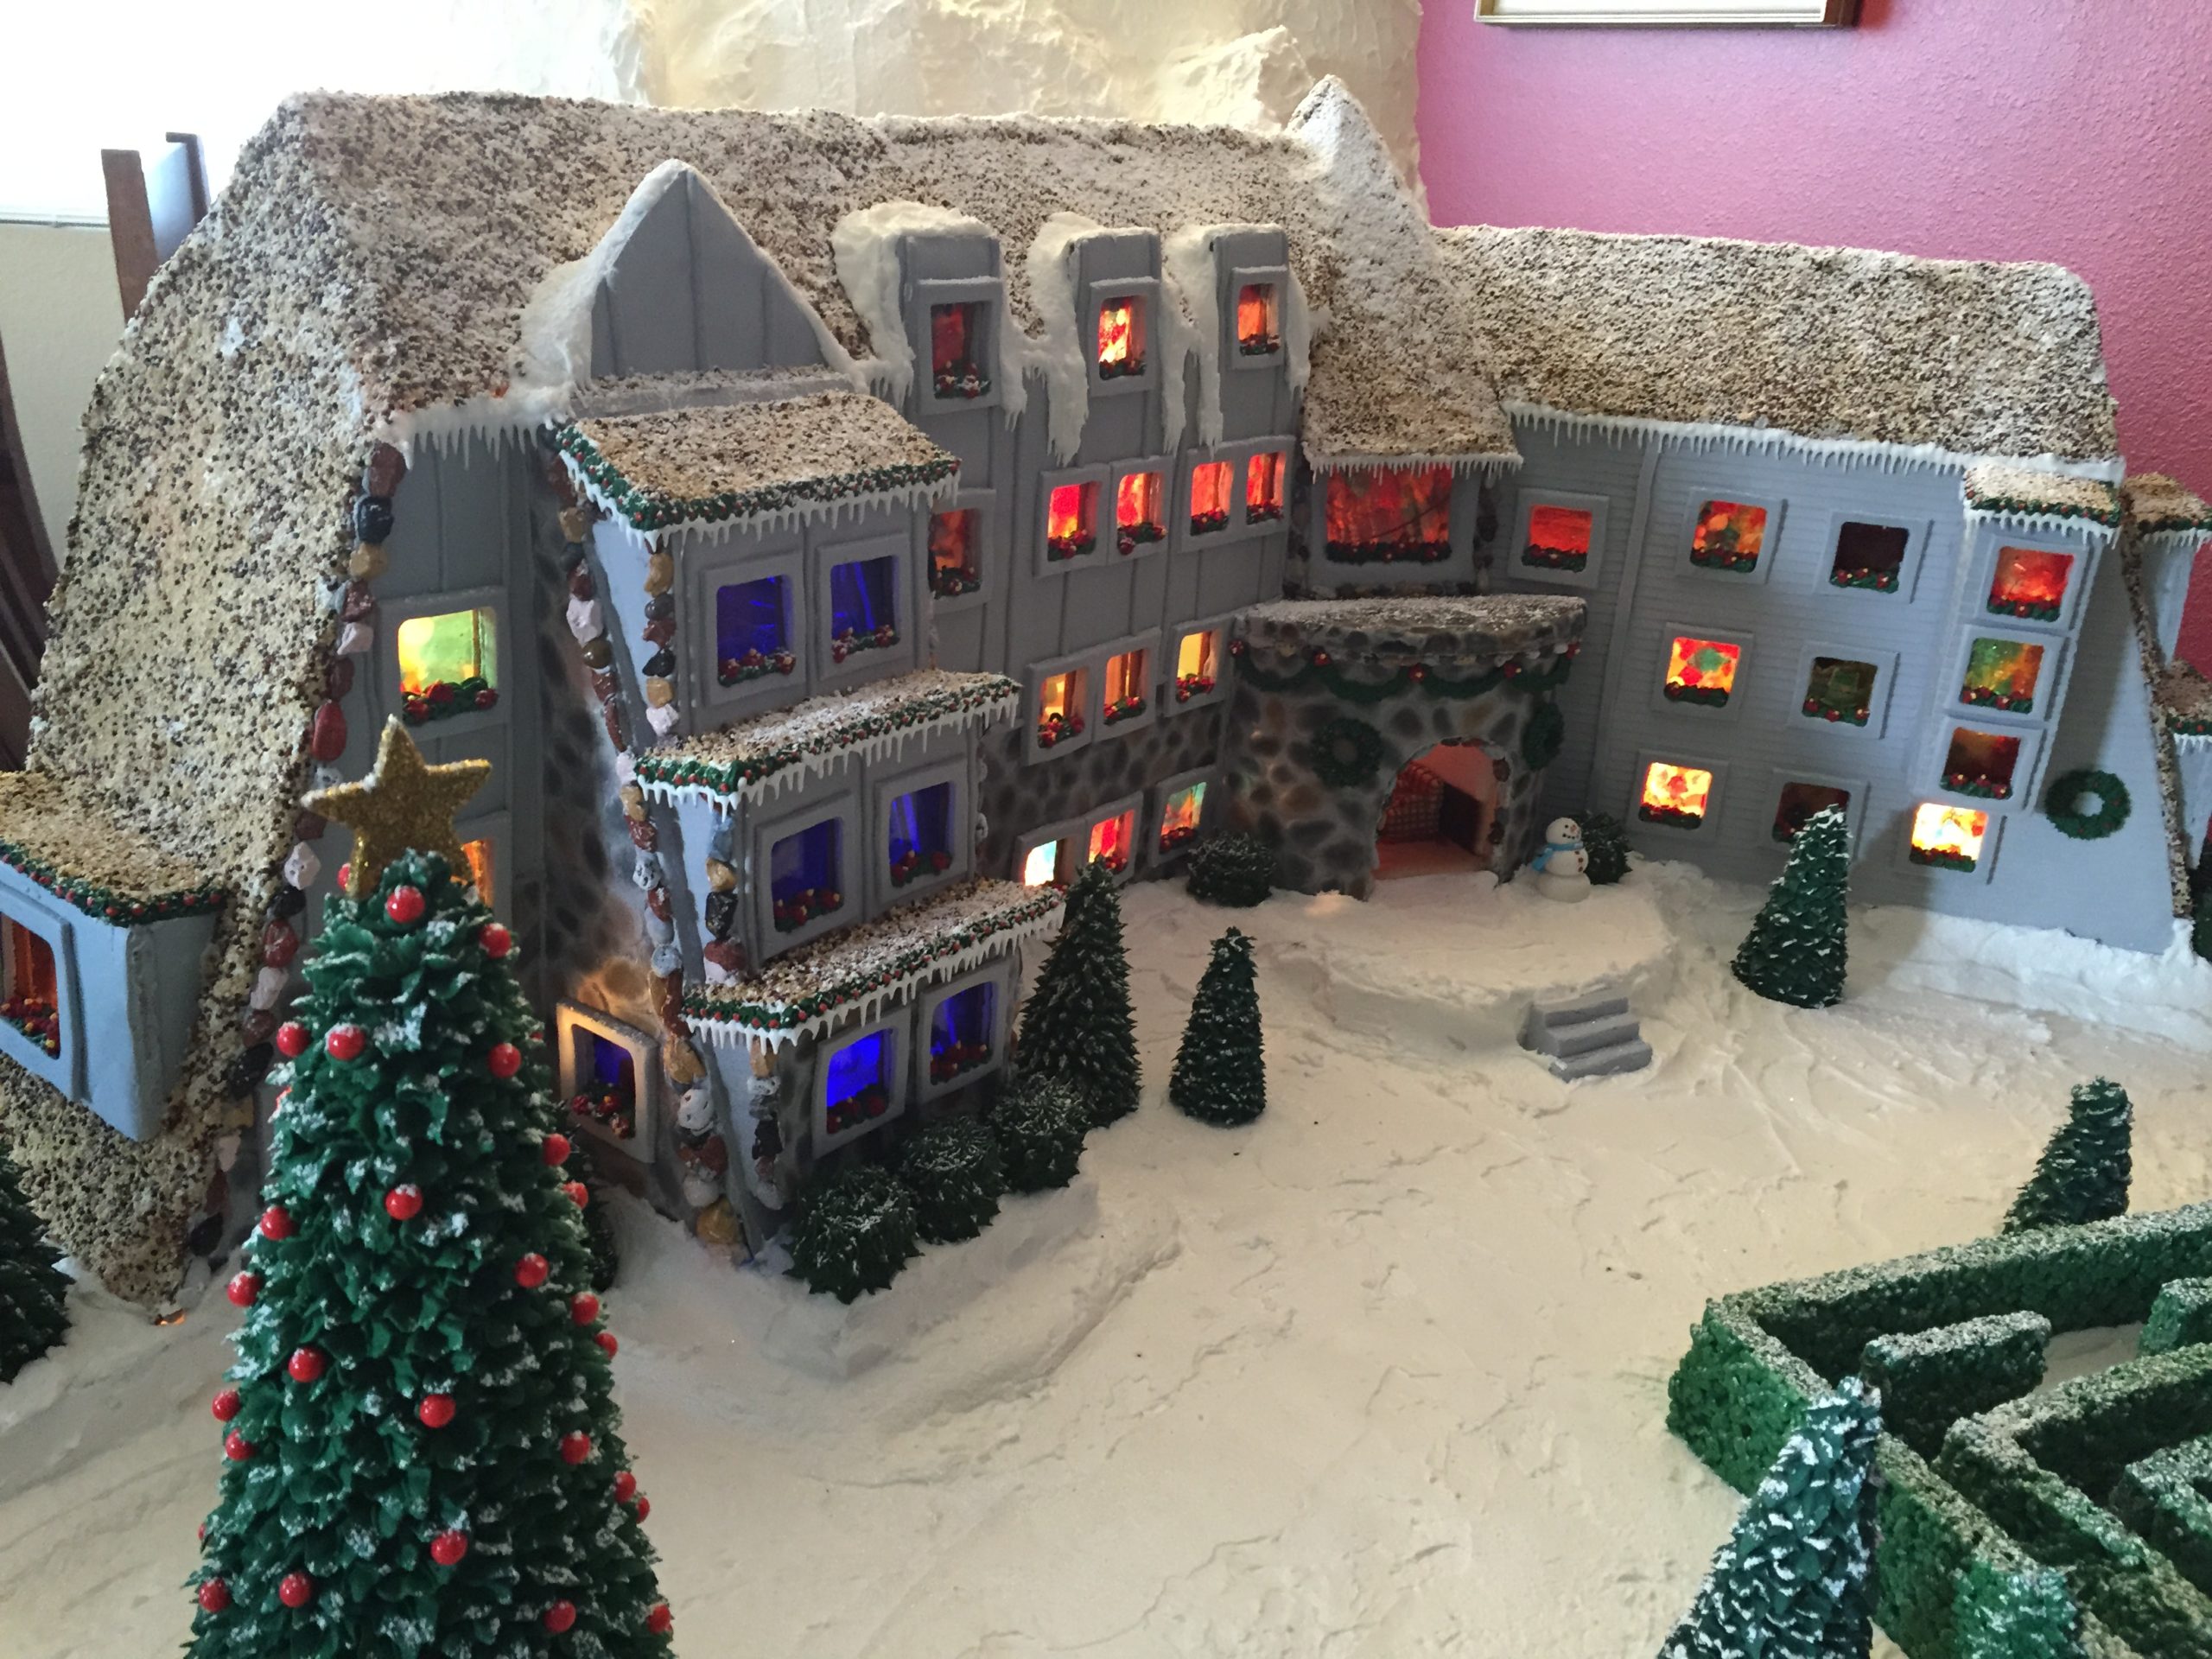 I Hope No One Tries To Hack This Shining-Inspired Gingerbread Hotel To Pieces With A Knife